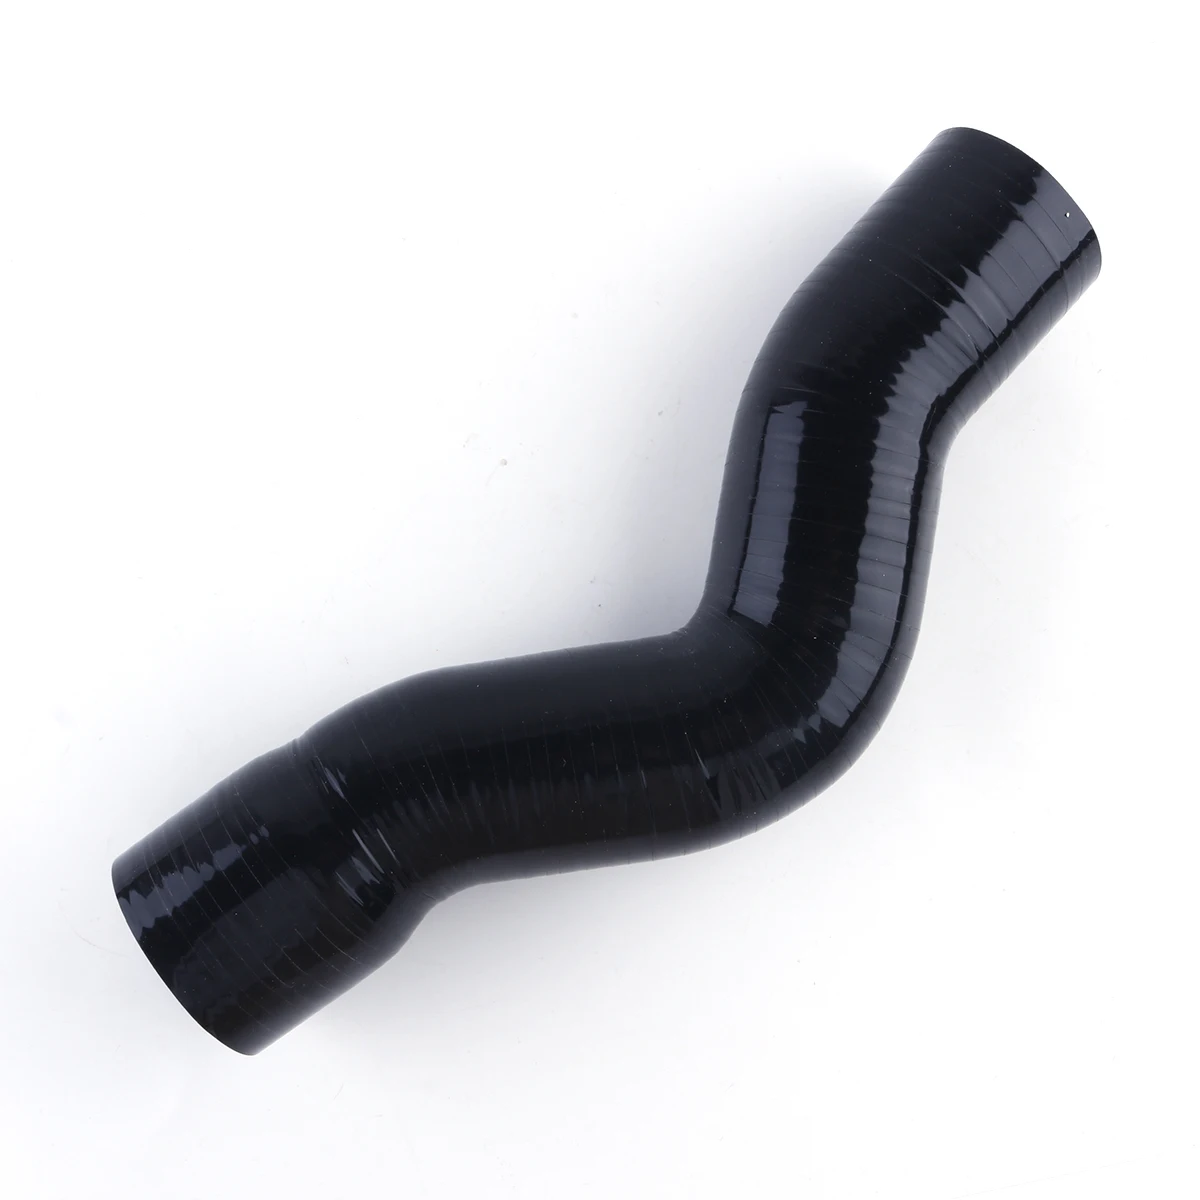 

New Silicone Intercooler EGR Turbo Boost Hose Pipe Piping Tube Tubing Duct Set Kit for Ford S-MAX TDCI 2.2